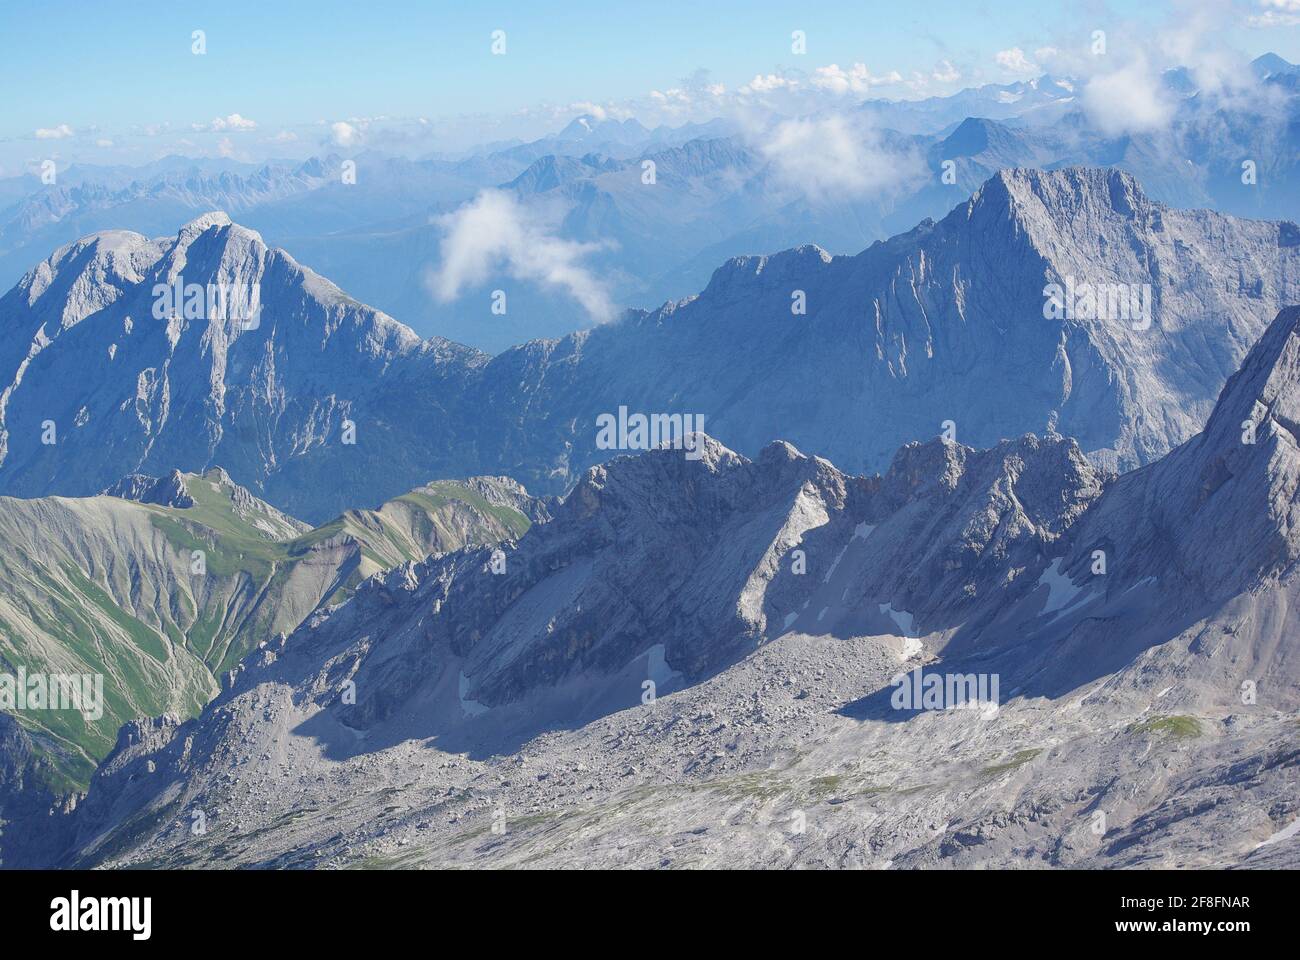 Views from the highest mountain in Germany, The Zuspitze 9,7718 ft (2,962 m.), Wetterstein Mountains, Alps Stock Photo